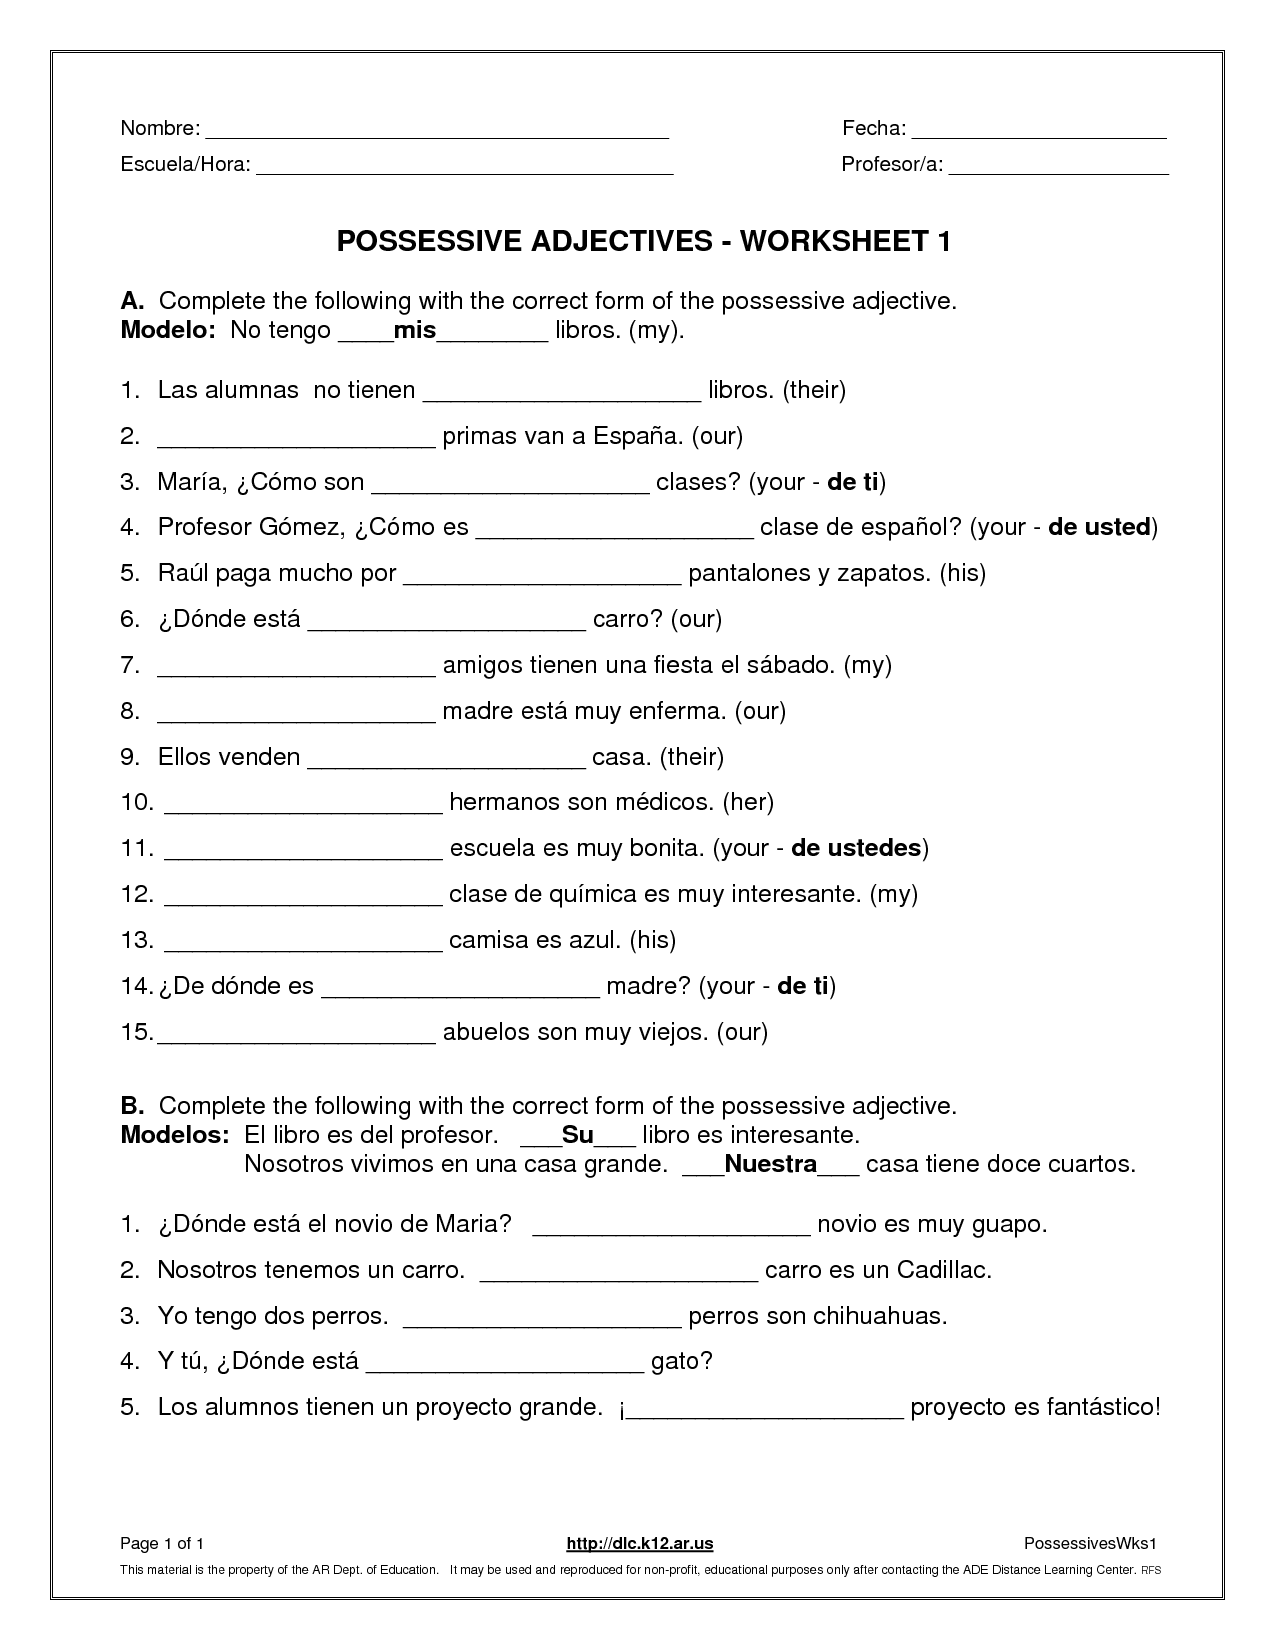 16 Best Images Of Adjectives Exercises Worksheets Printable Adjective Worksheets 2nd Grade